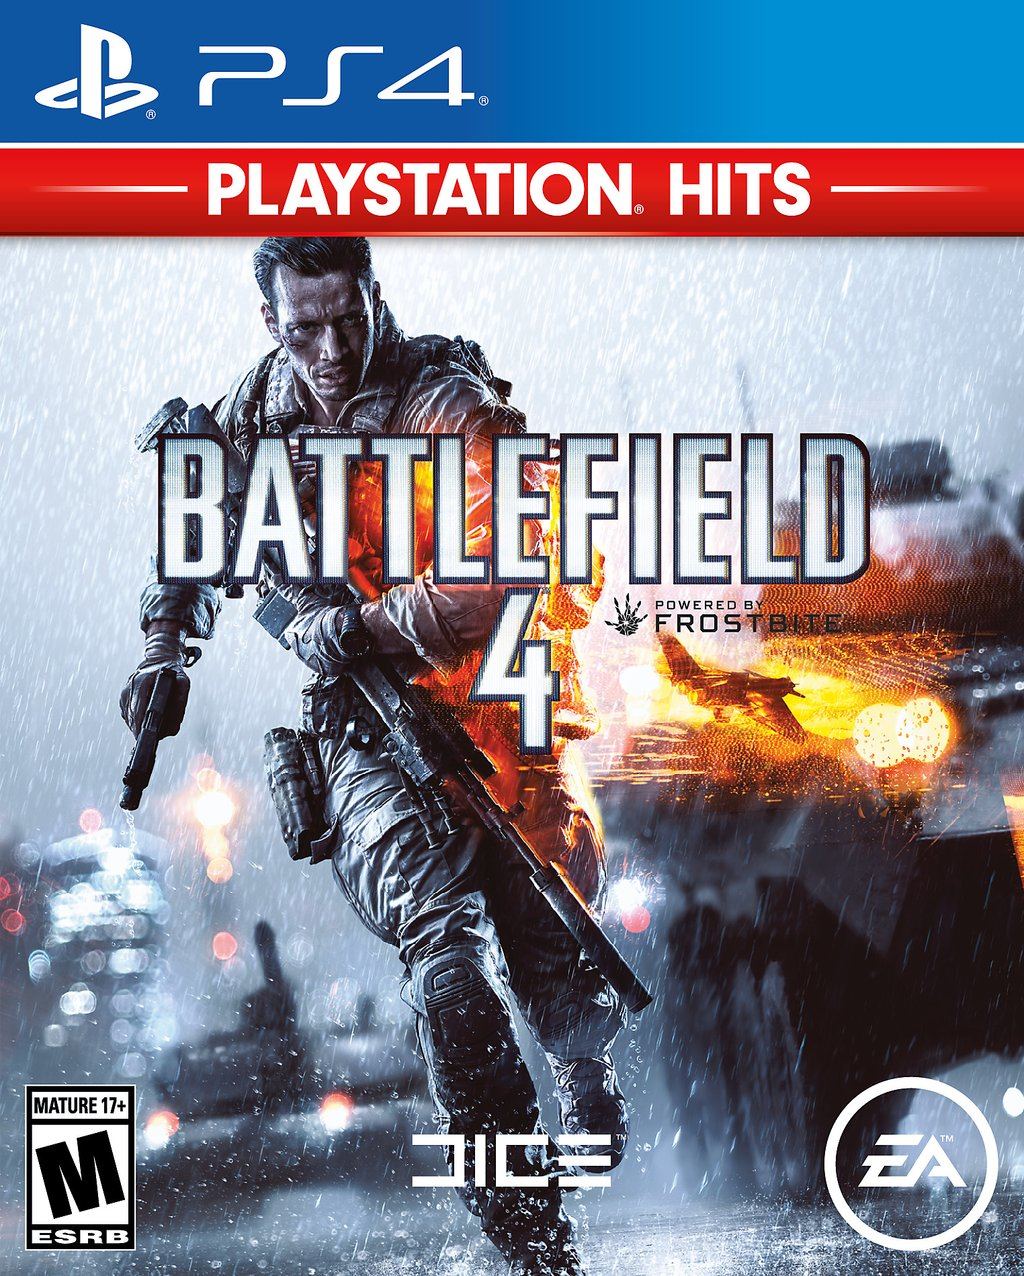 Battlefield (PlayStation Hits) for 4